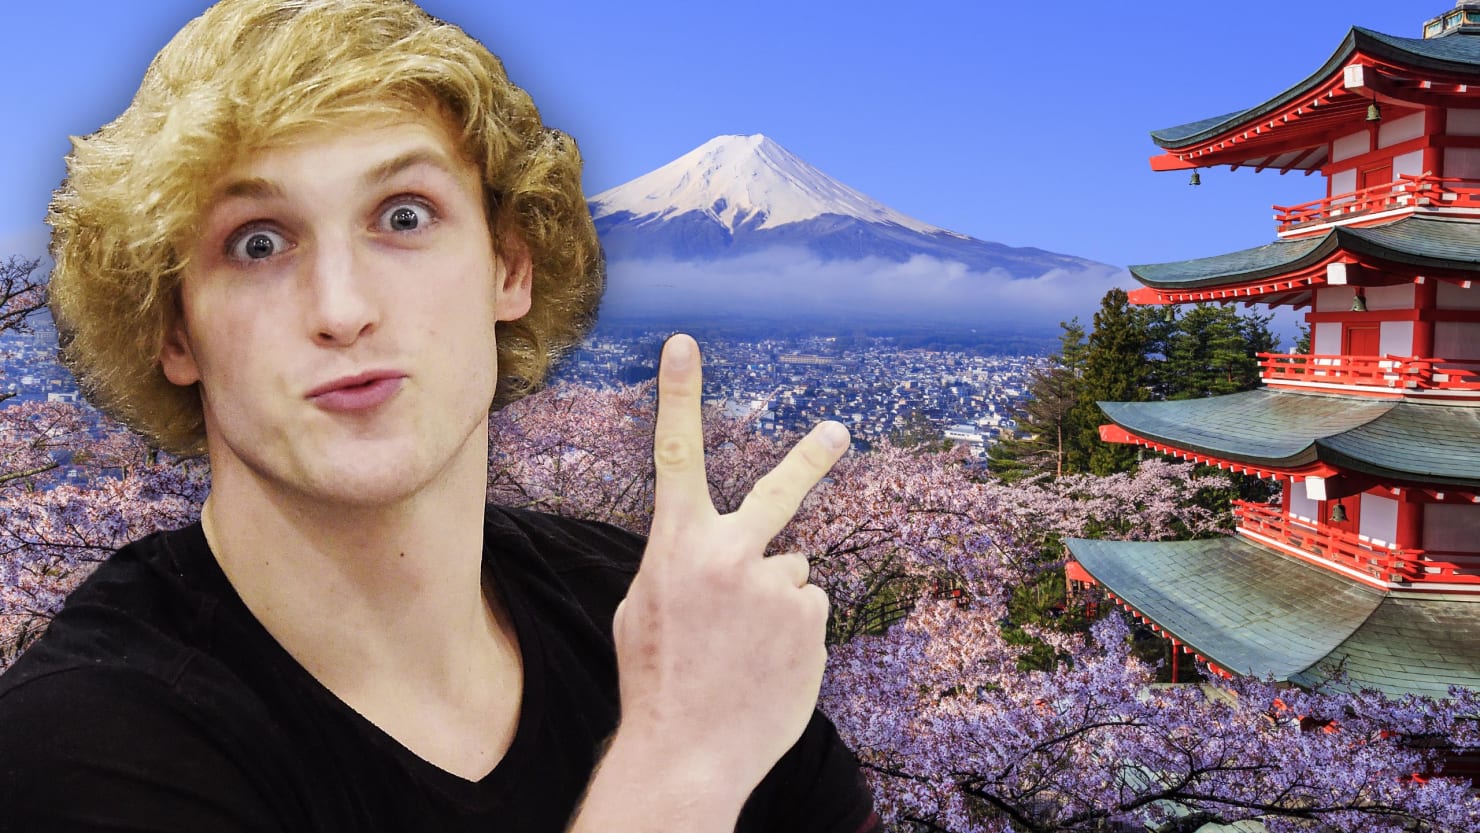 Japanese Cops Say Logan Paul Videos Broke The Law—and They D Just Love To Nail Him